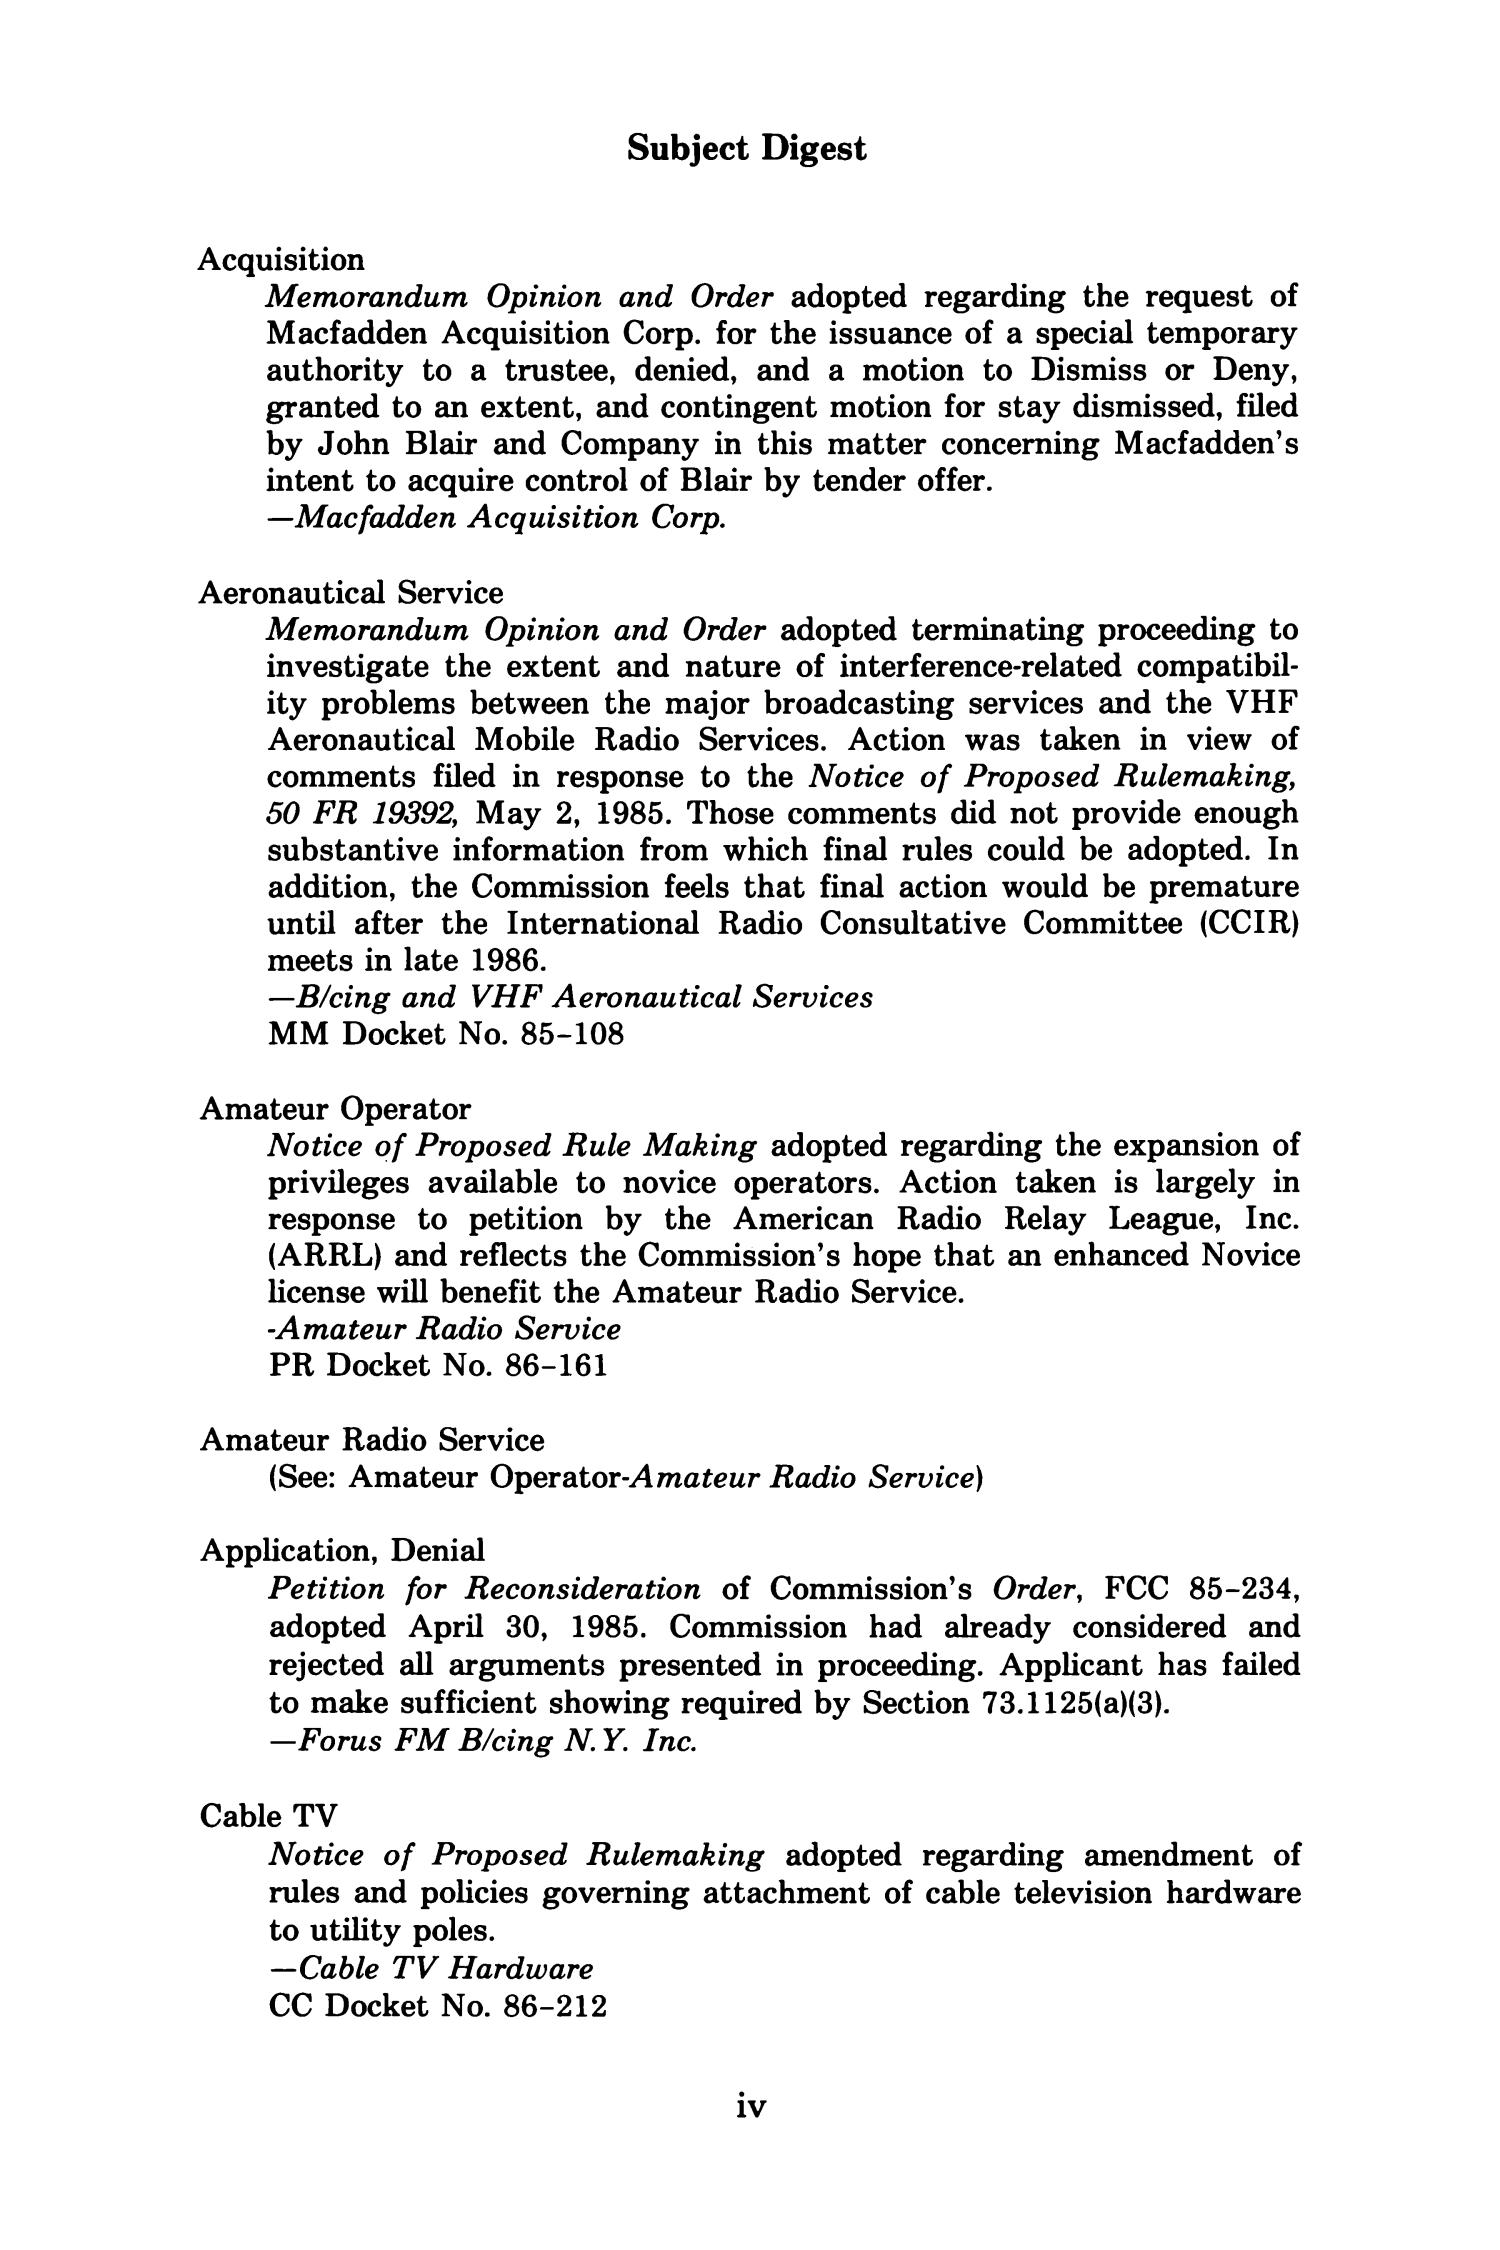 FCC Reports, Second Series, Volume 104, Number 2, Pages 375 to 719, August 1986
                                                
                                                    IV
                                                